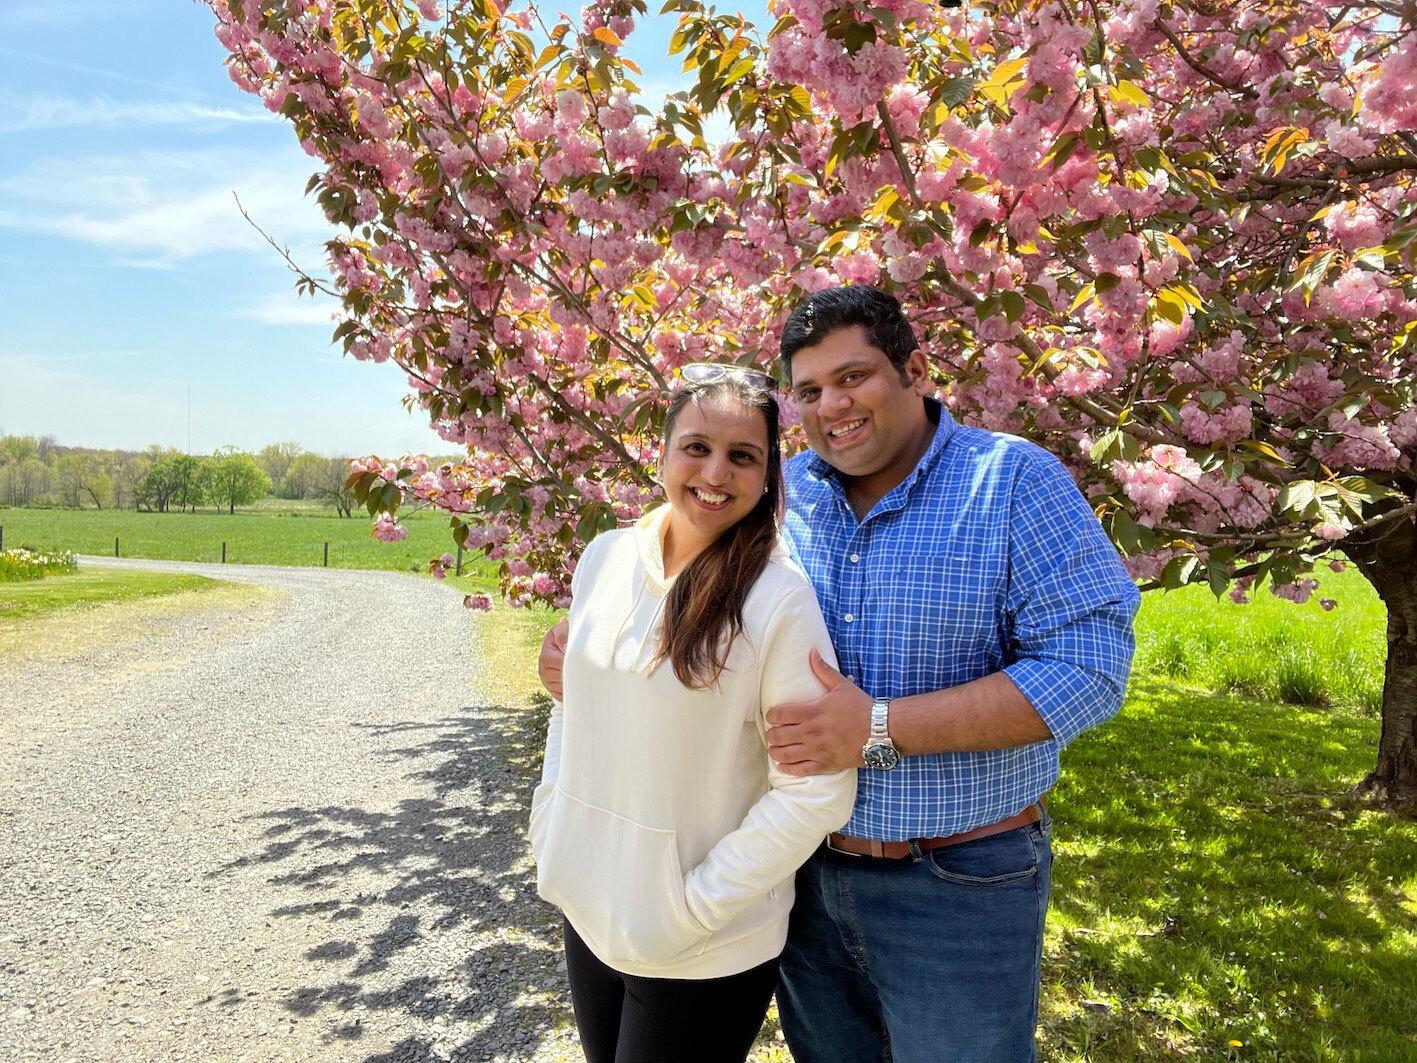 Rachana’s Los Angeles Vacation Became a Lifetime Connection When She Met Anuj